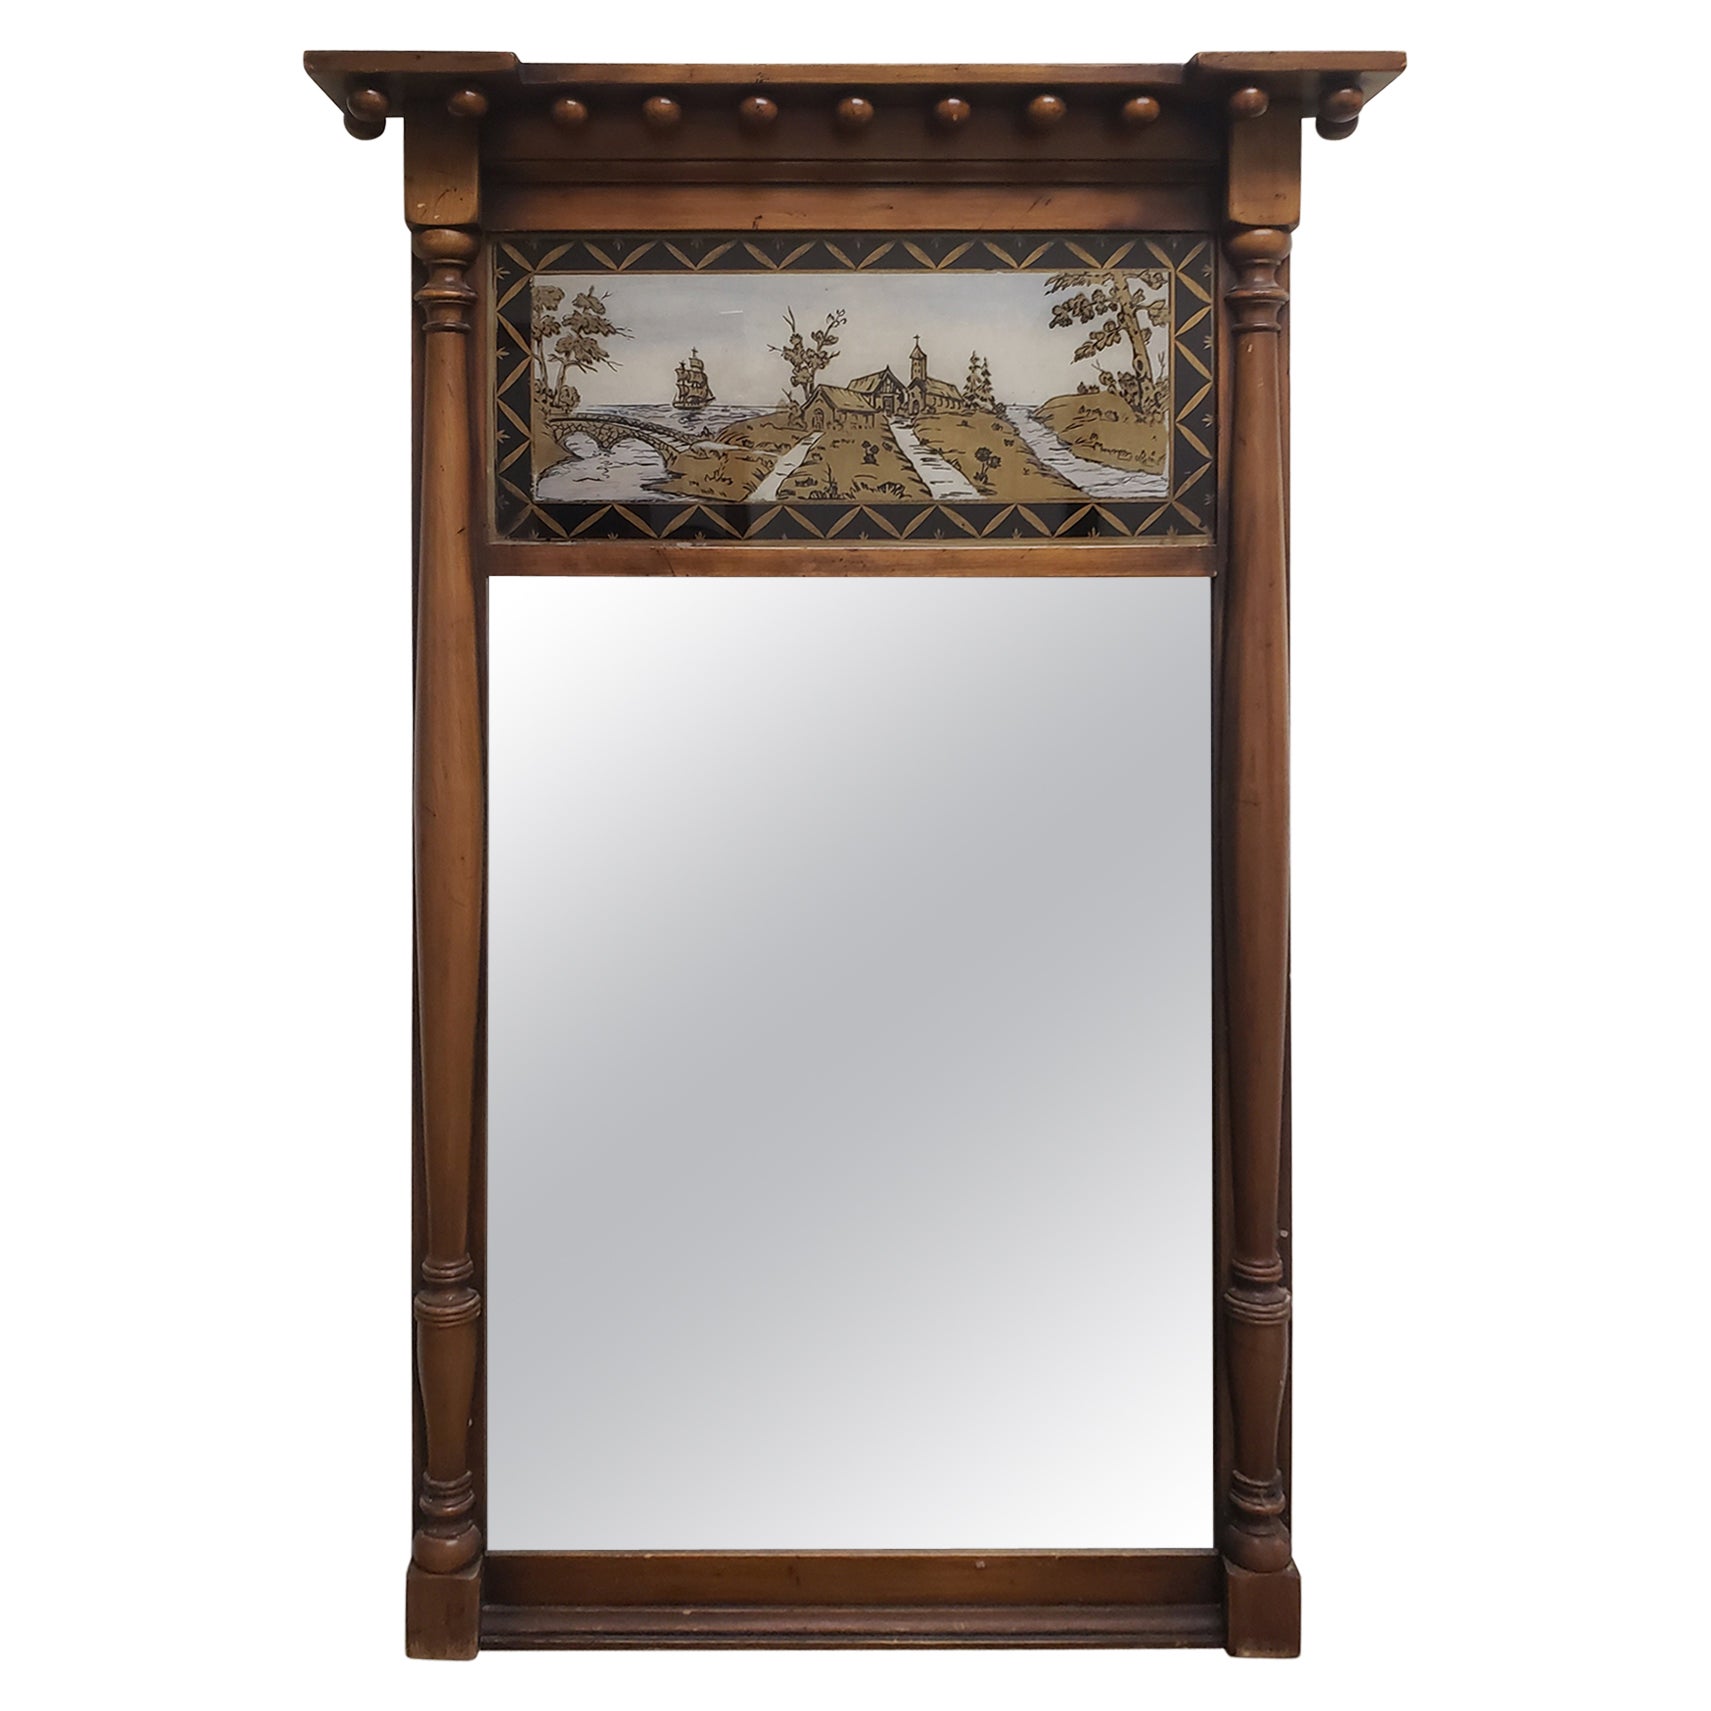 Early 20th Century Federal Style Mahogany And Eglomise Wall Trumeau Mirror